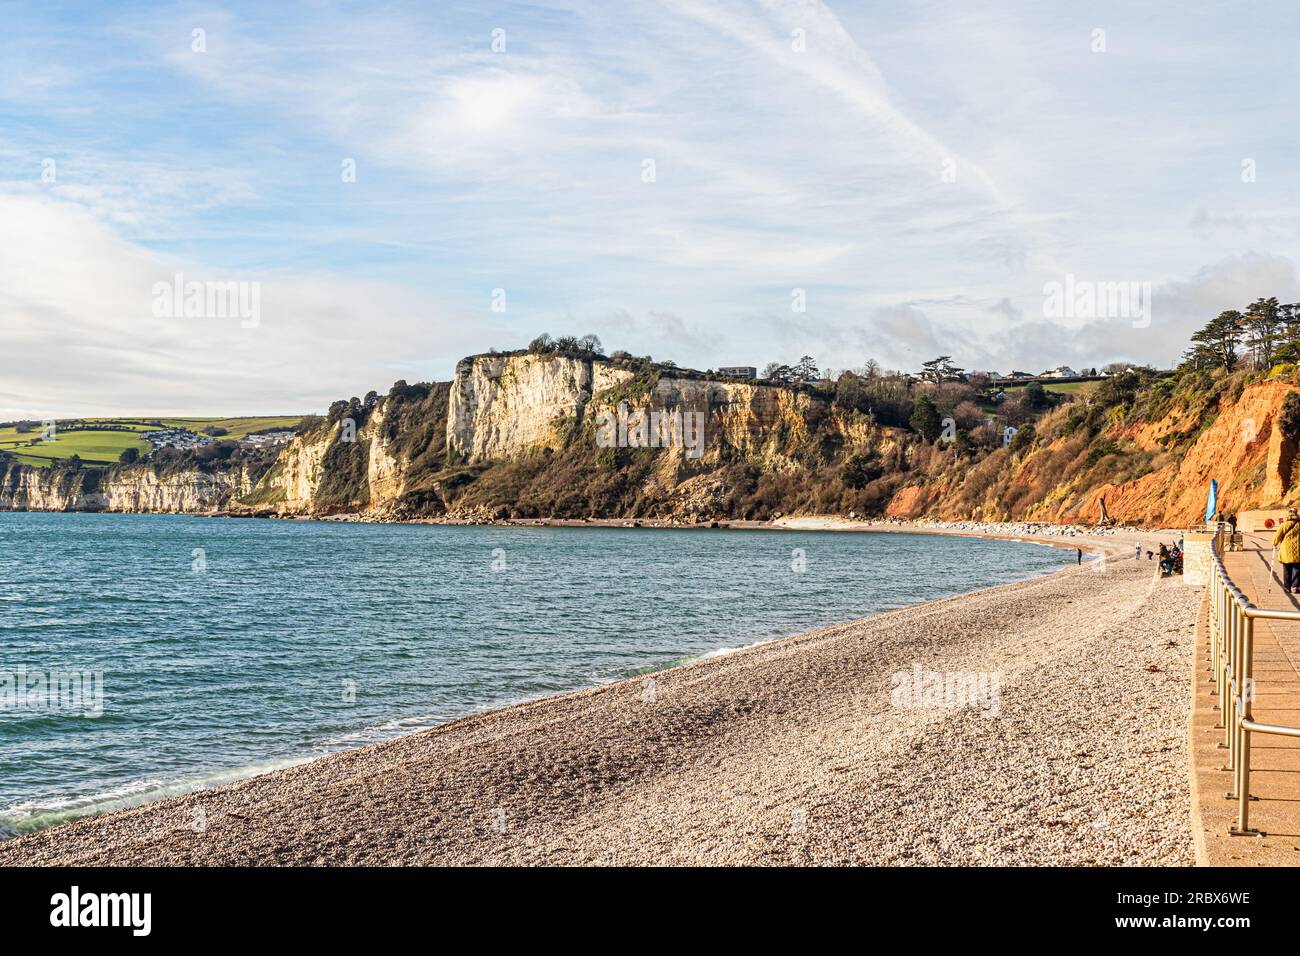 Seaton Town and shingles beach is situated between Axmouth and Beer on the Jurassic Coast World Heritage Site in Devon, United Kingdom Stock Photo